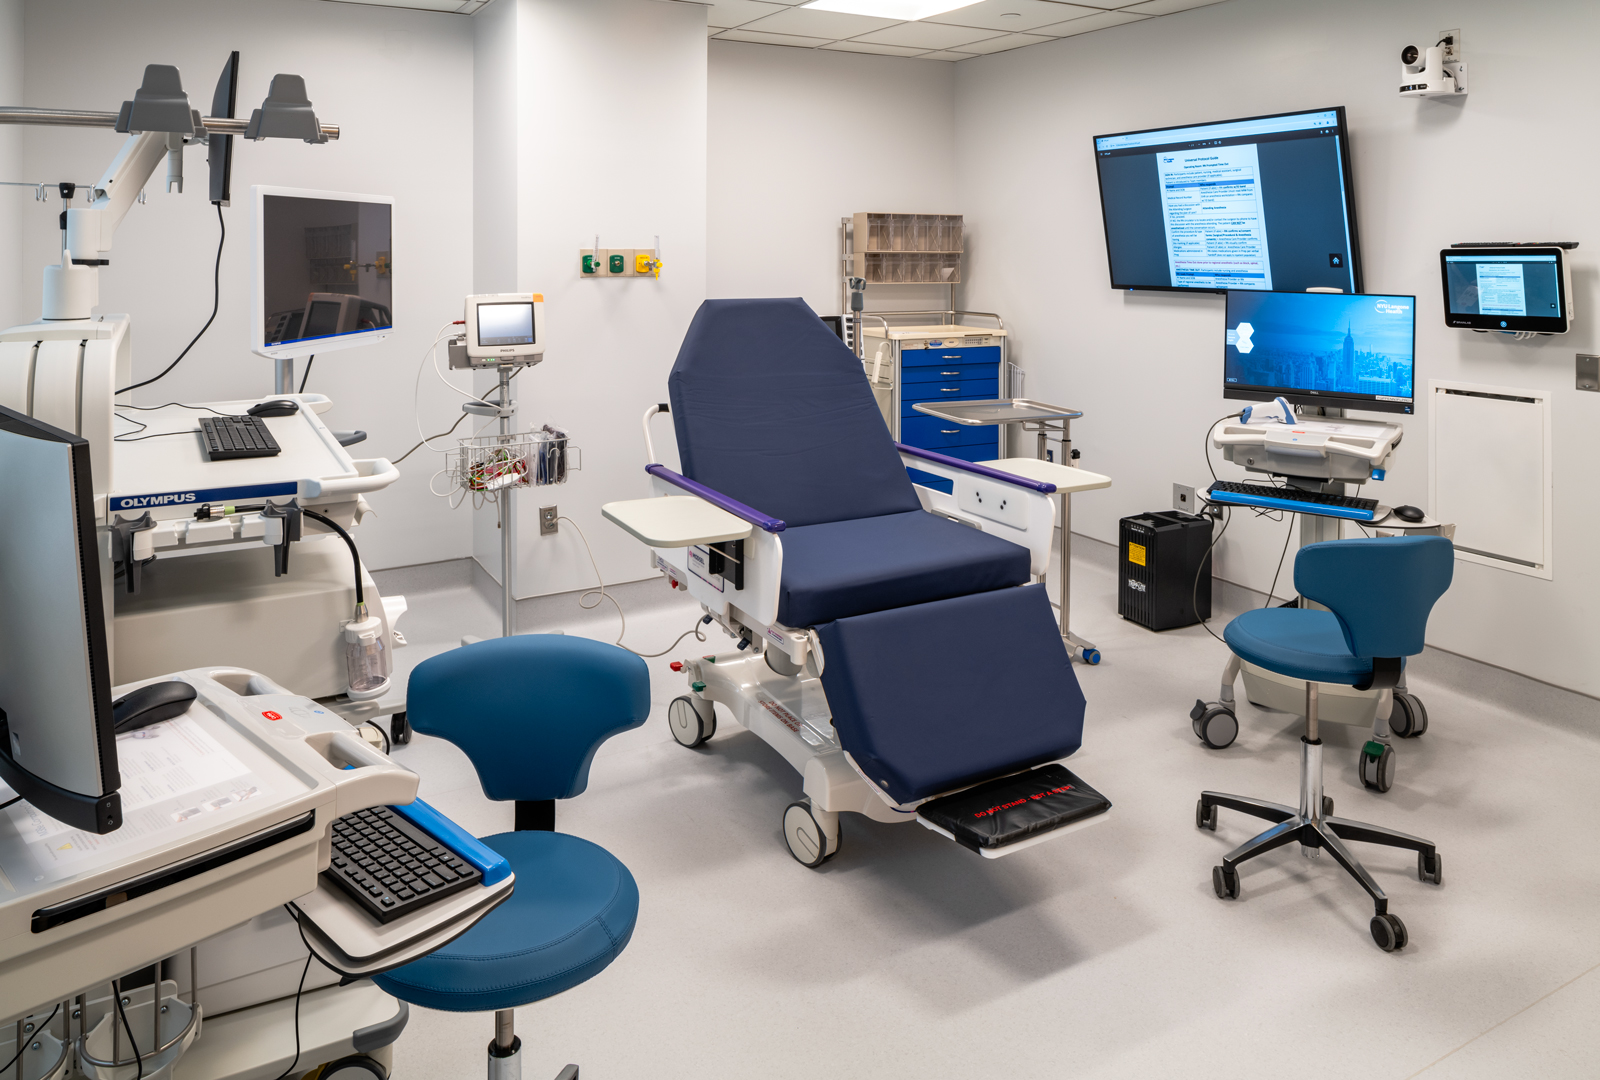 Endoscopy room with chair for patient and various technology